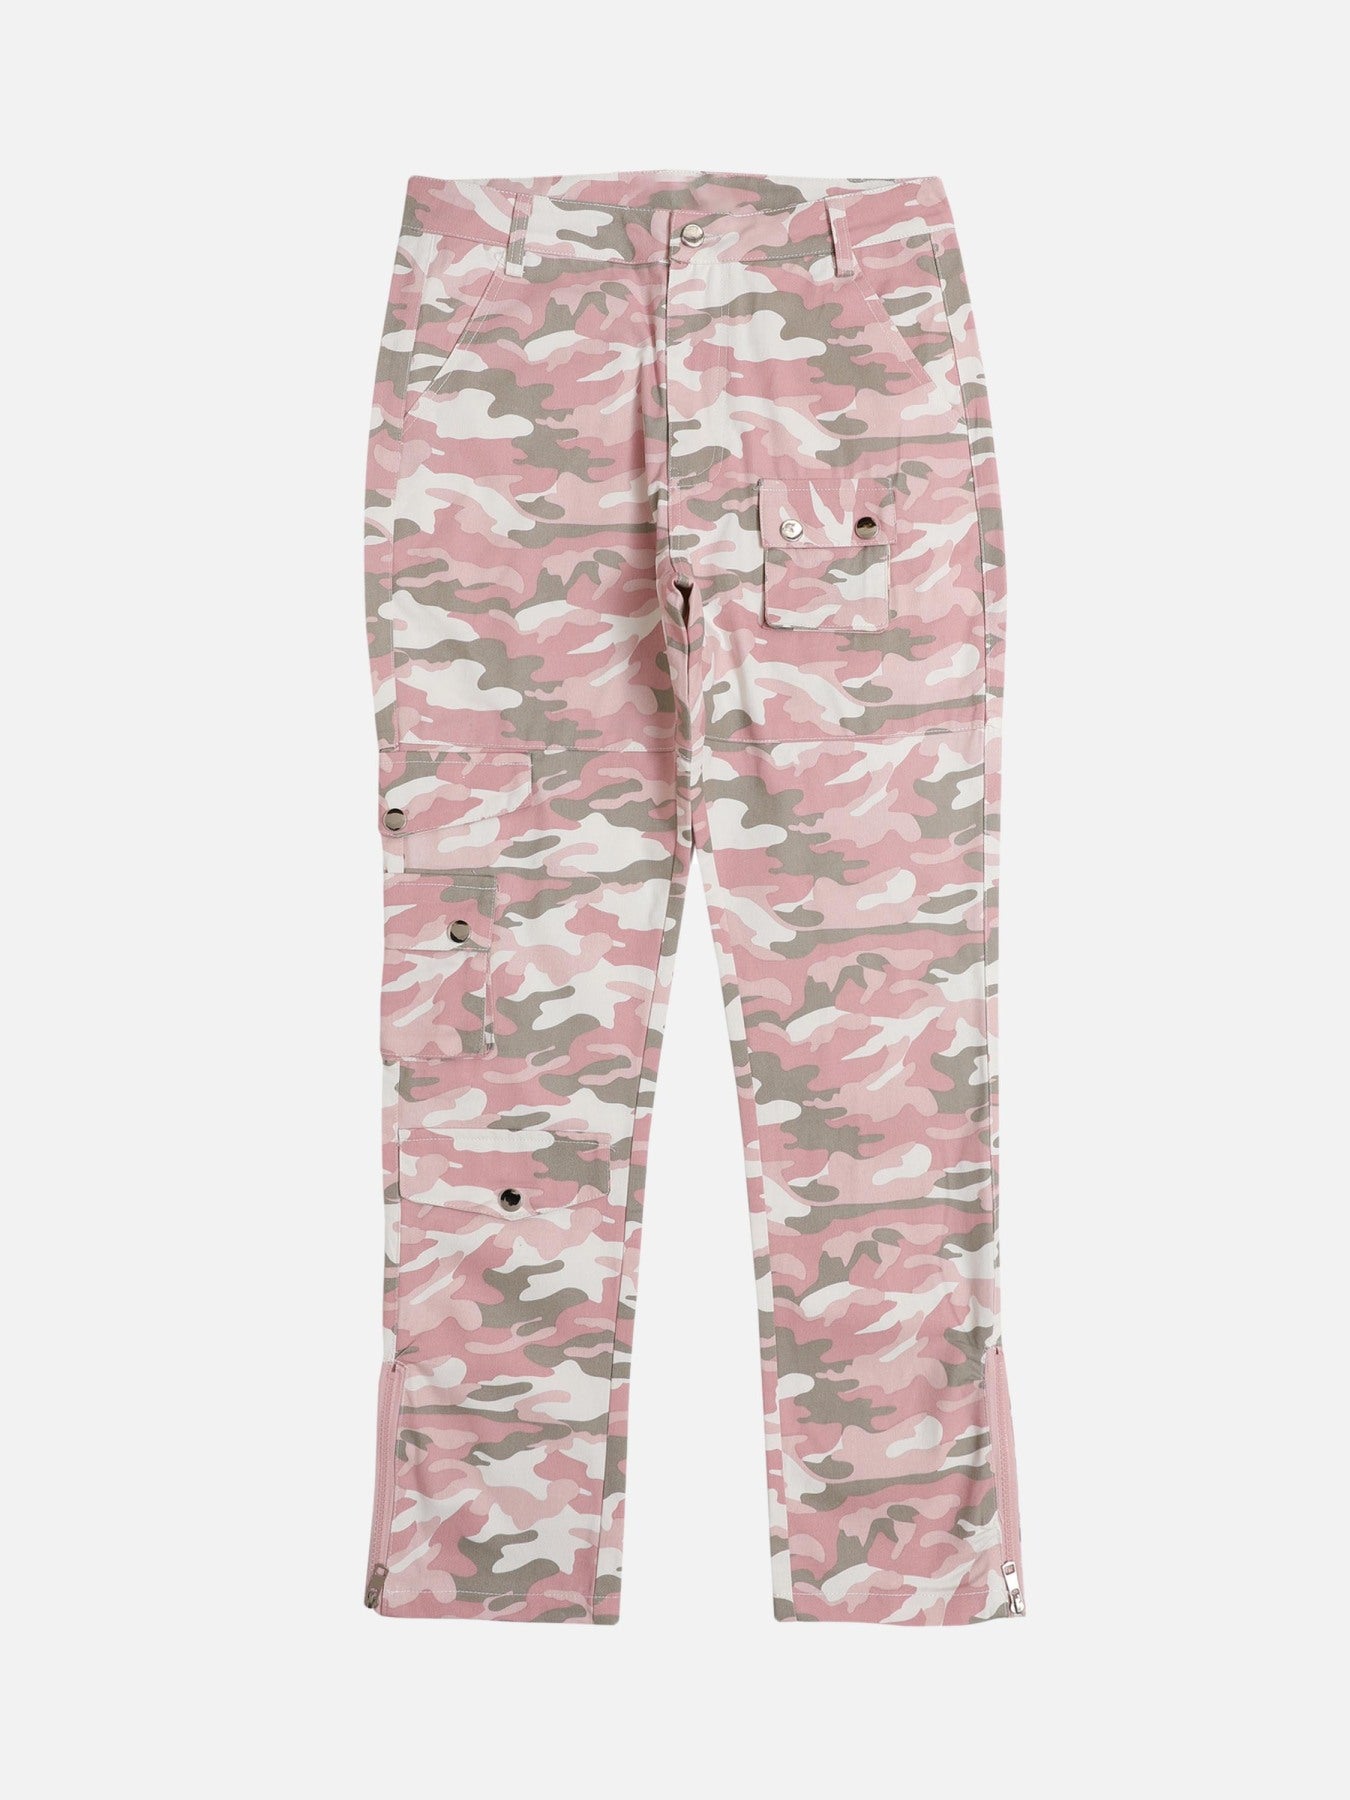 Thesupermade Multi Pocket Camouflage Casual Pants